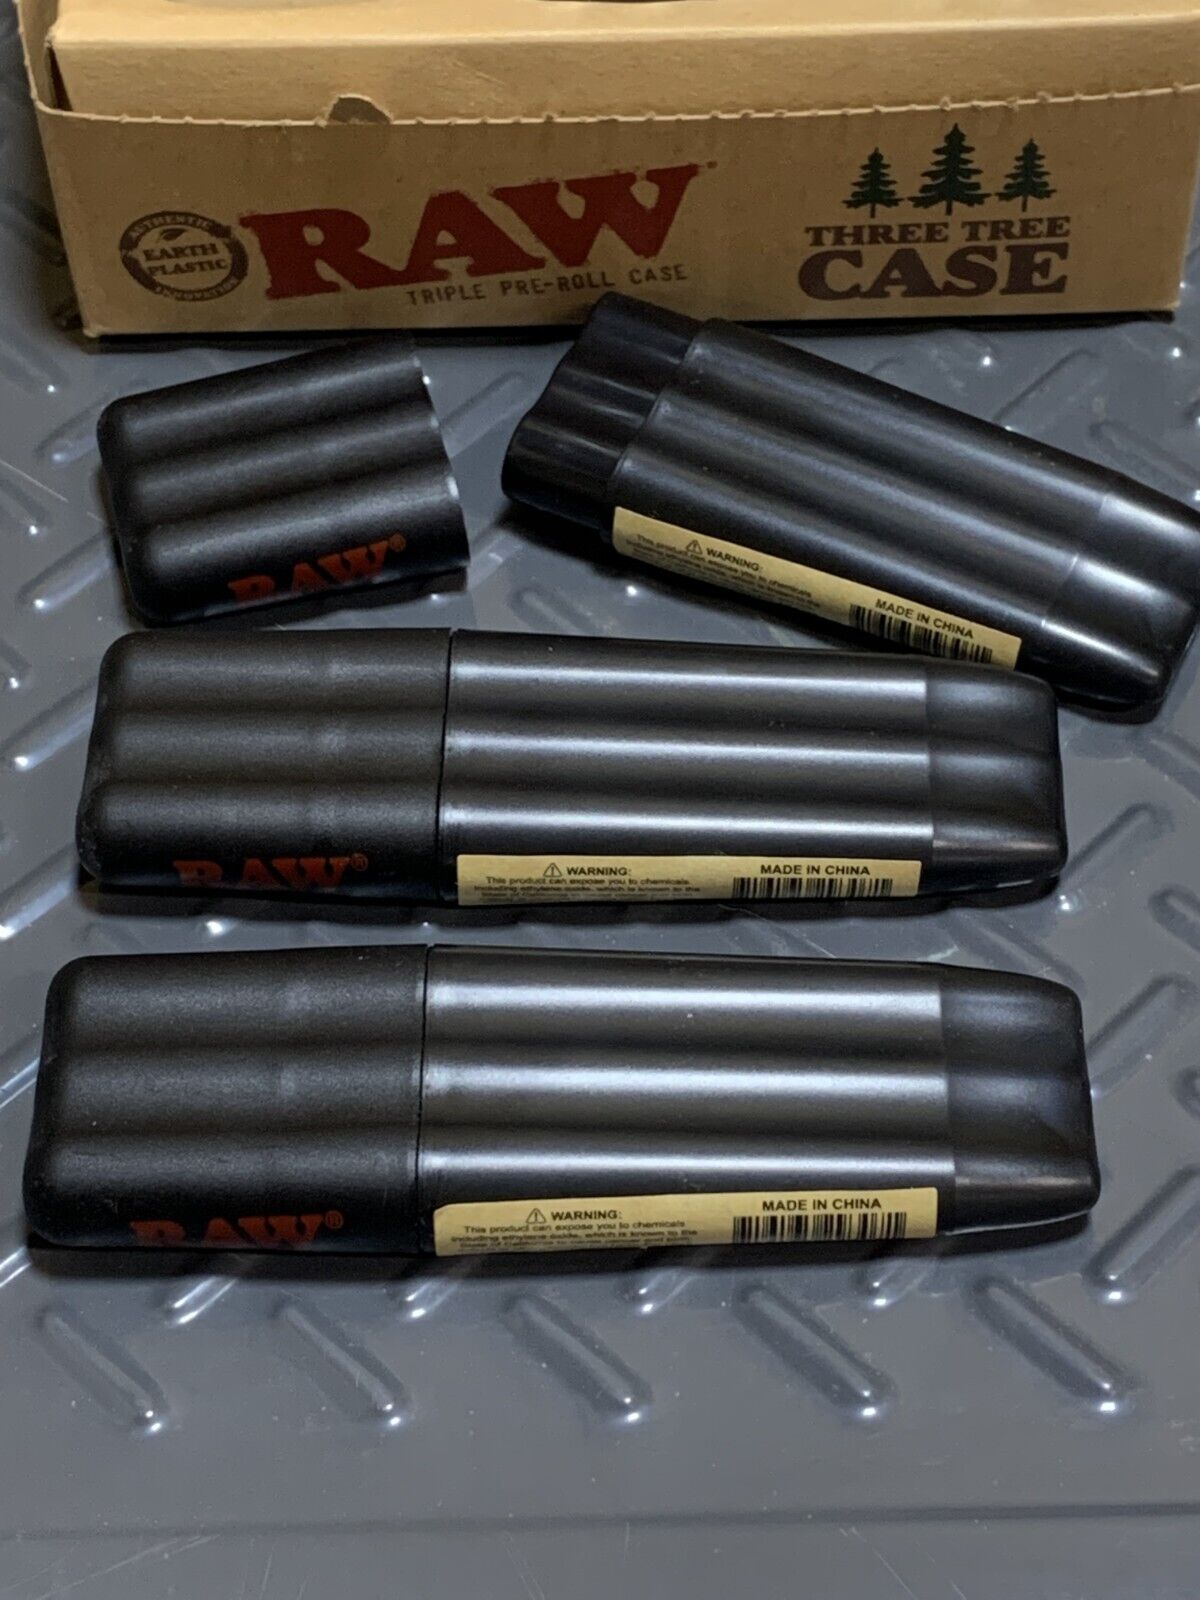 BUY THREE RAW Rolling Papers THREE TREE CONE CASES Eco Friendly pocket size